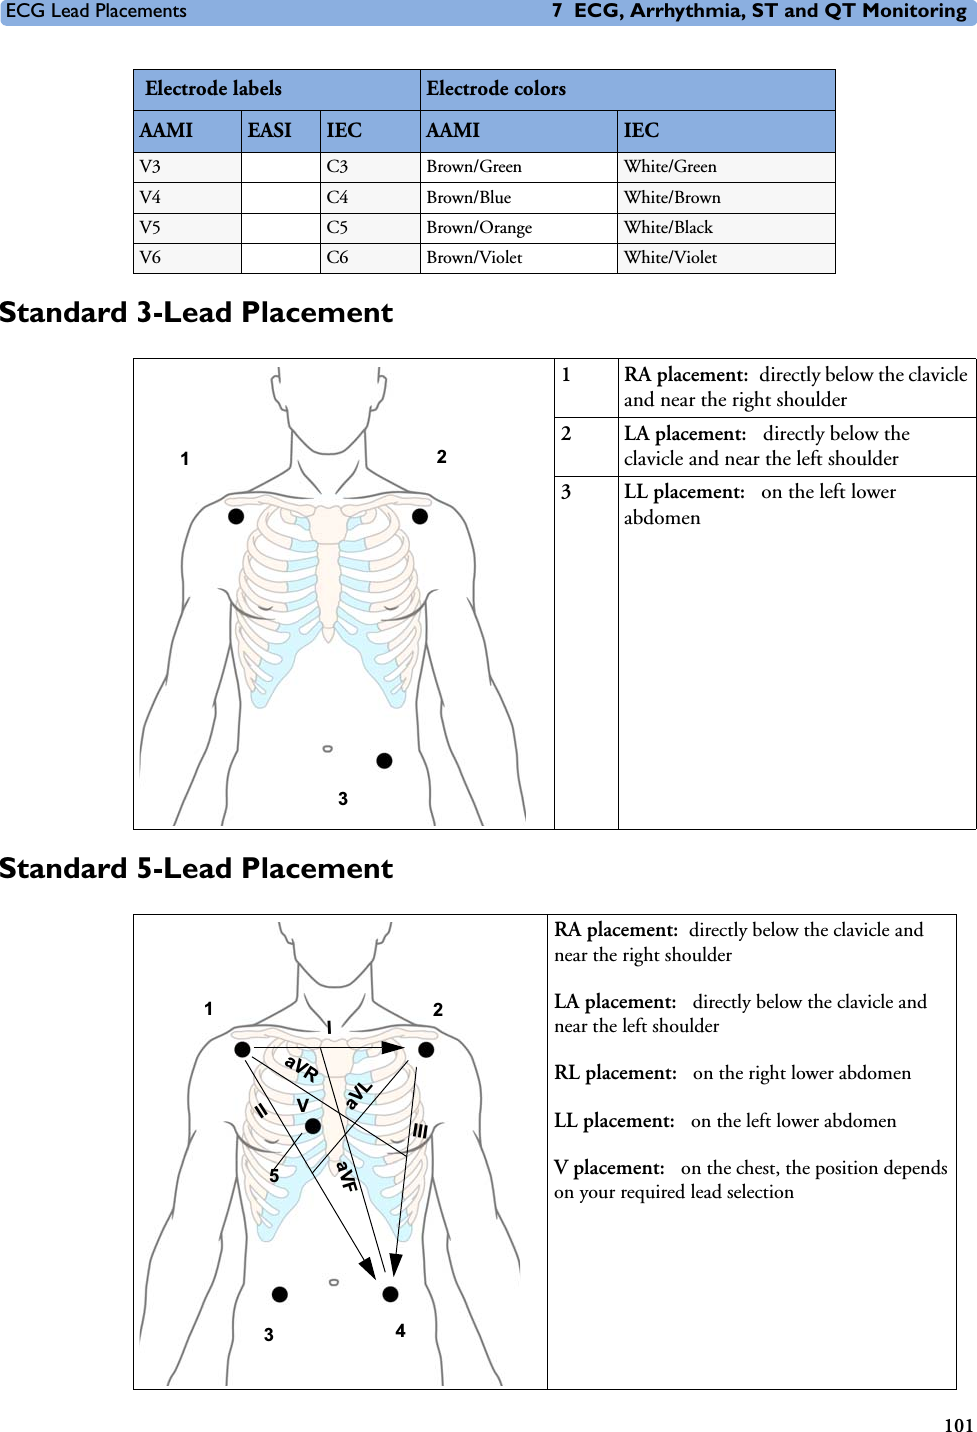 ECG Lead Placements 7 ECG, Arrhythmia, ST and QT Monitoring101Standard 3-Lead PlacementStandard 5-Lead PlacementV3 C3 Brown/Green White/GreenV4 C4 Brown/Blue White/BrownV5 C5 Brown/Orange White/BlackV6 C6 Brown/Violet White/Violet Electrode labels Electrode colorsAAMI EASI  IEC AAMI IEC1 RA placement: directly below the clavicle and near the right shoulder2 LA placement:  directly below the clavicle and near the left shoulder3 LL placement:  on the left lower abdomen123RA placement: directly below the clavicle and near the right shoulderLA placement:  directly below the clavicle and near the left shoulderRL placement:  on the right lower abdomenLL placement:  on the left lower abdomenV placement:  on the chest, the position depends on your required lead selection2 4 1V 3 IIIIIIaVRaVLaVF5